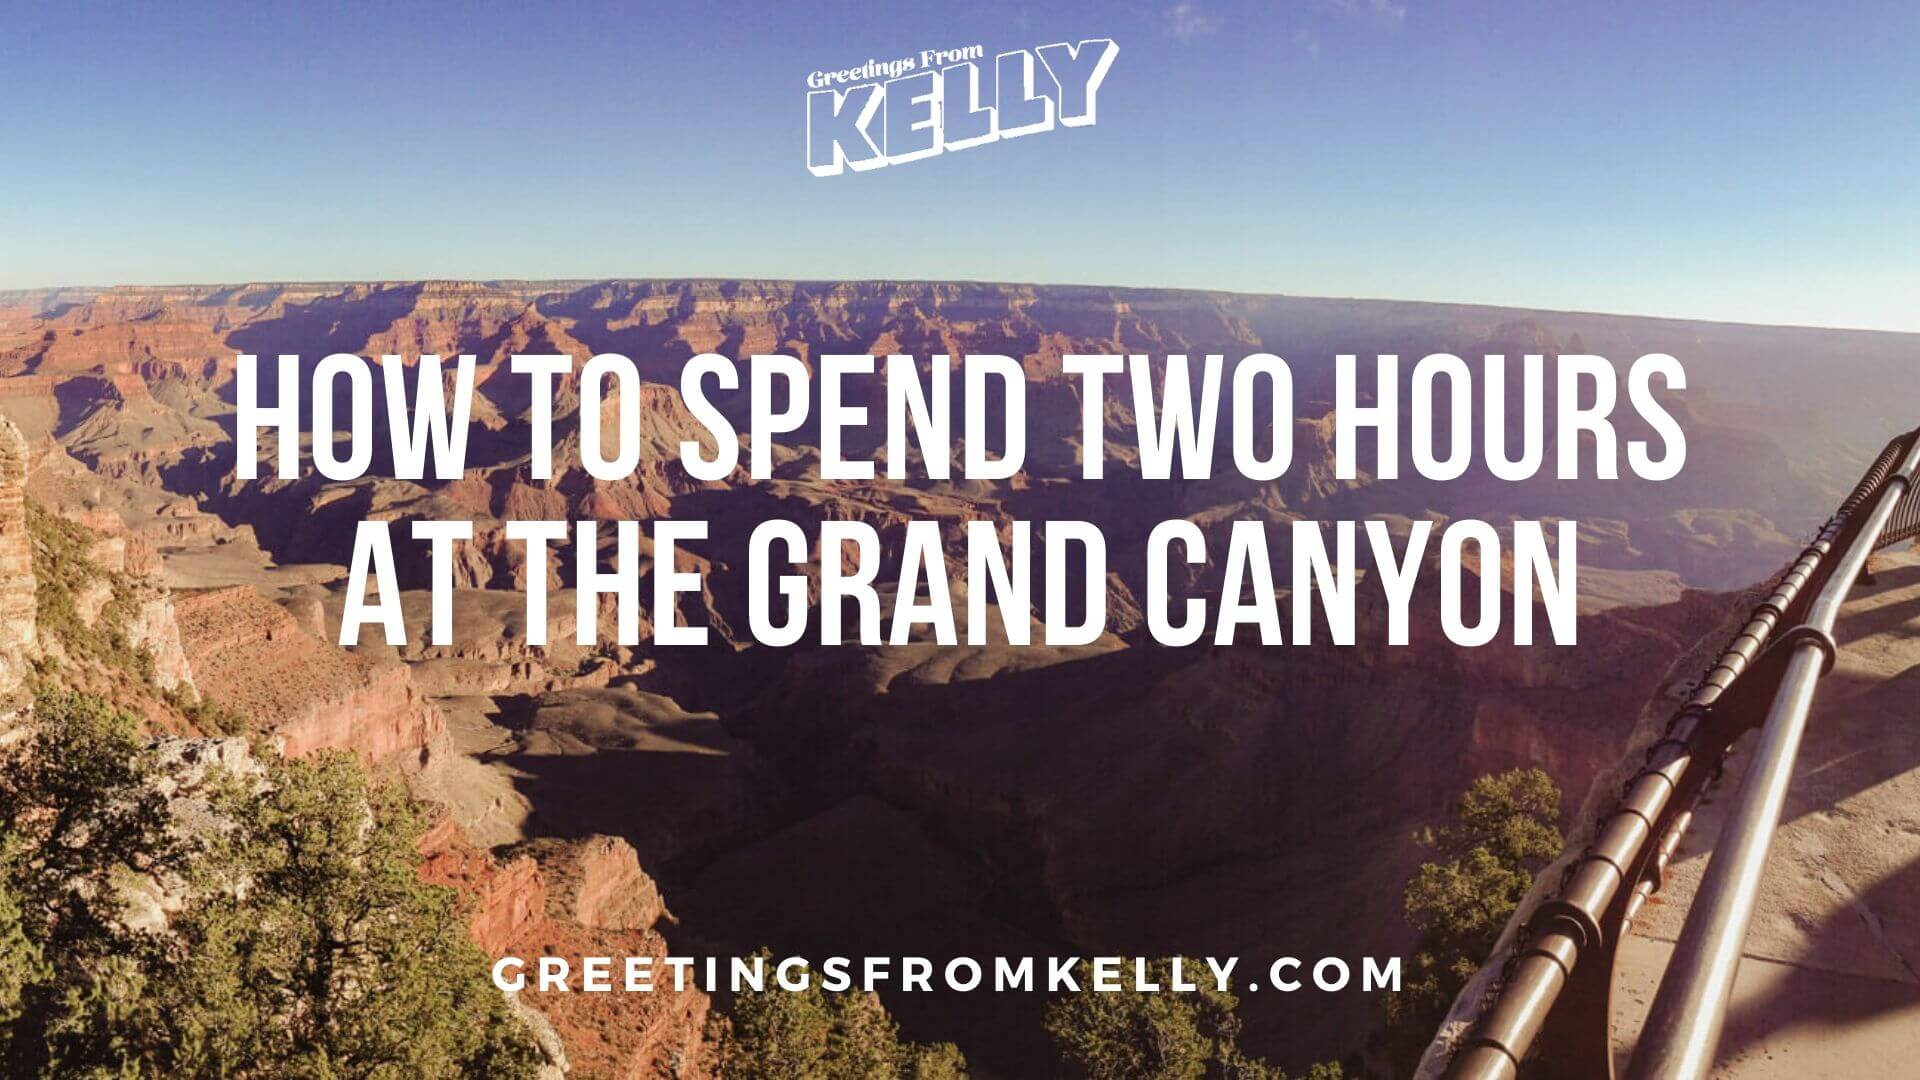 How to Spend Two Hours at the Grand Canyon